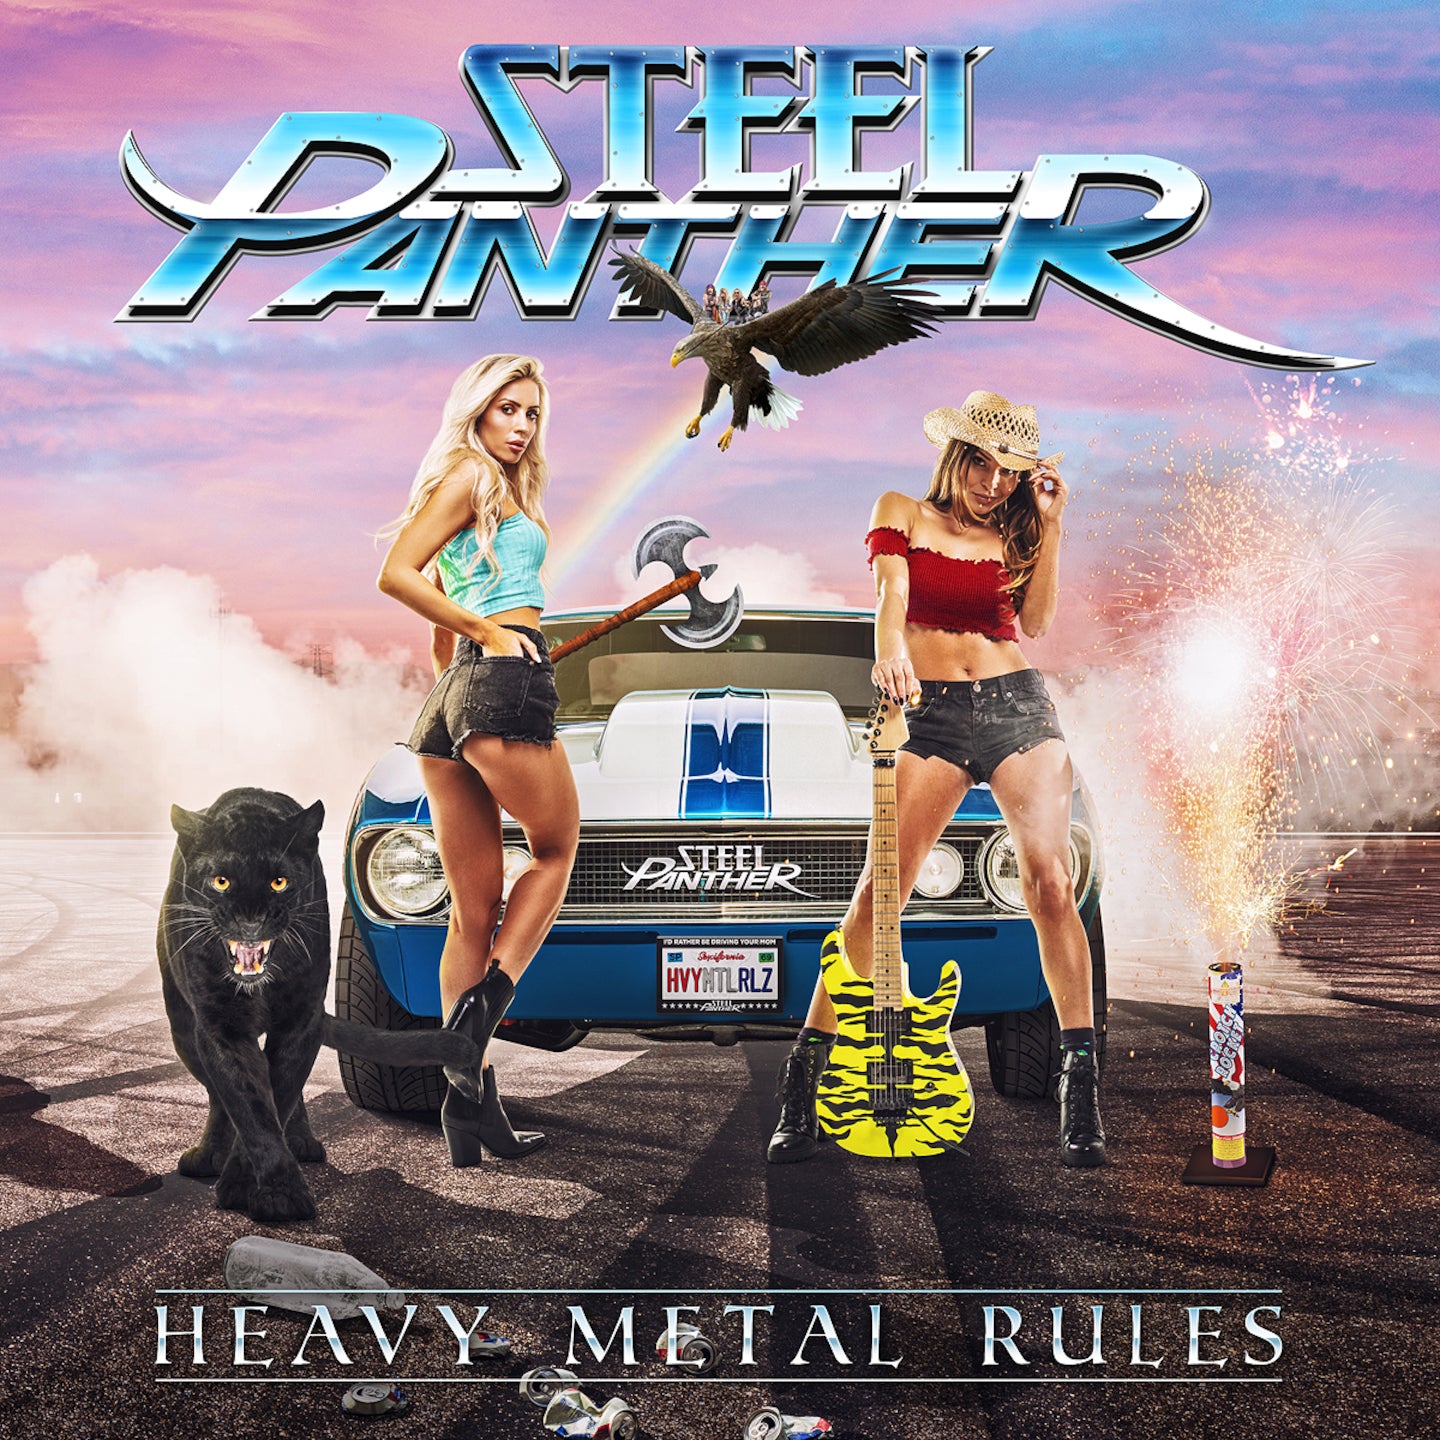 Heavy Metal Rules - Fanthers Download